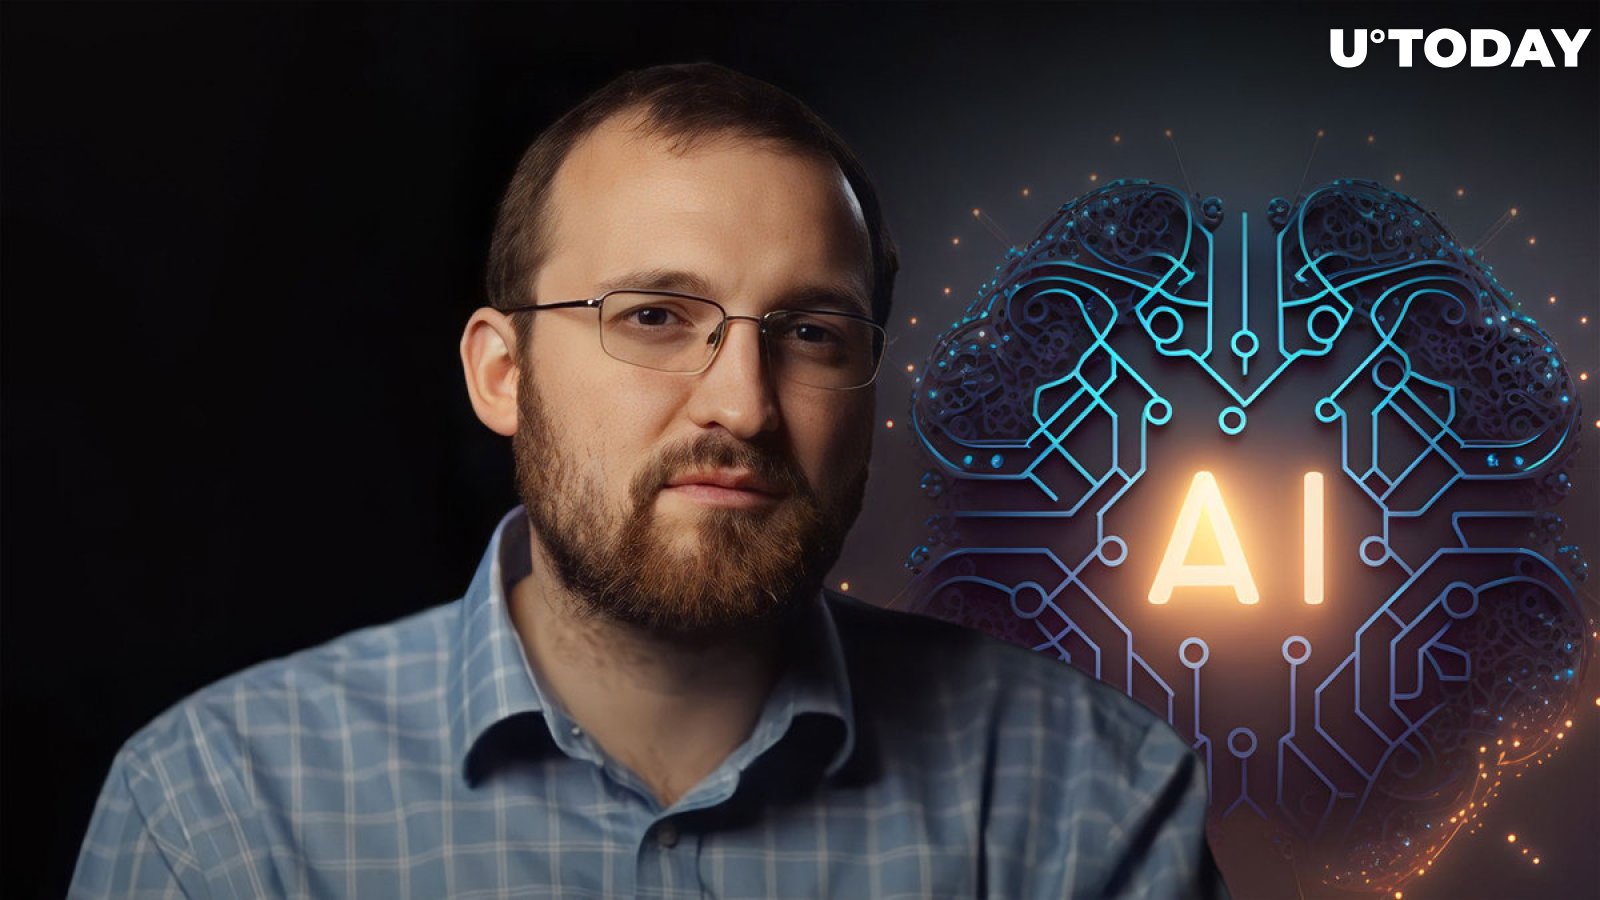 Cardano Founder Shares Concerns About AI Products: Details